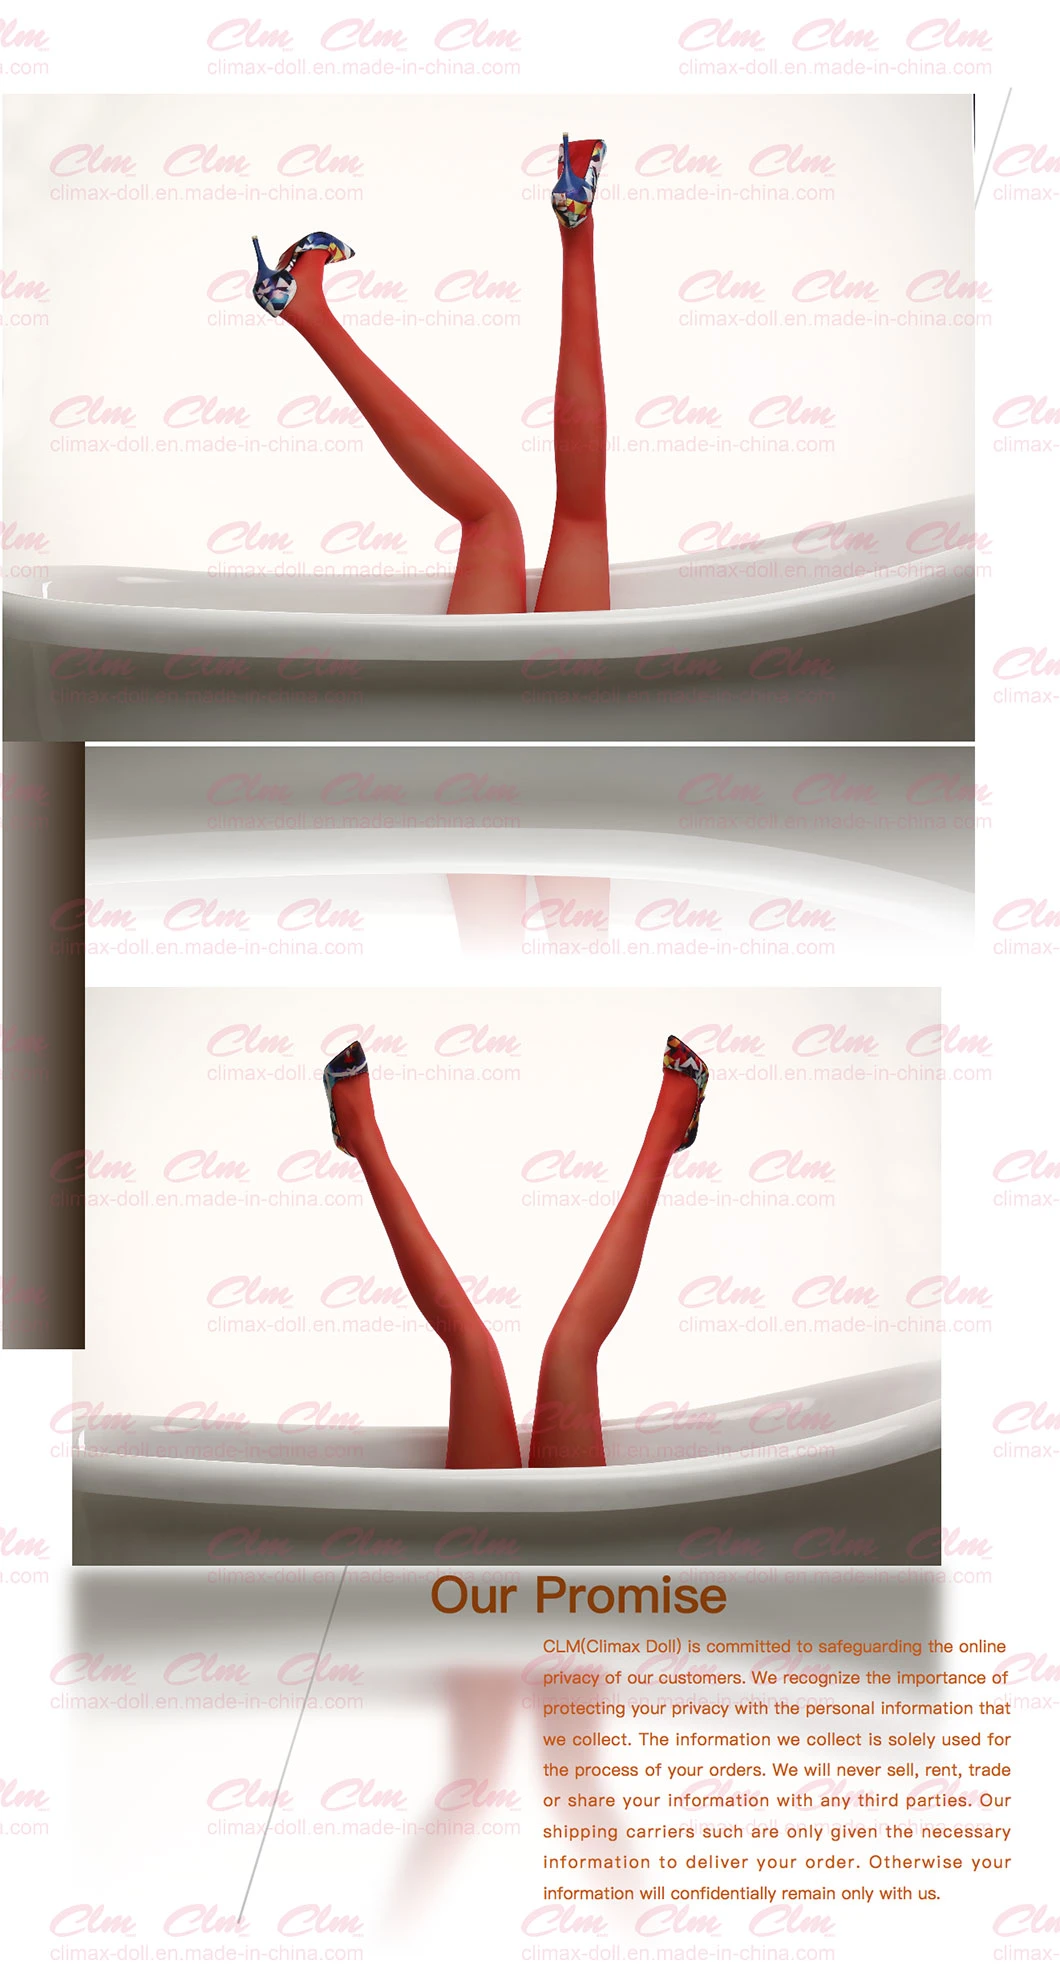 Clm (Climax Doll) New Style Foot Model Lifelike Mannequin Professional Manufacturer in China Adult Sex Toy Sex Doll